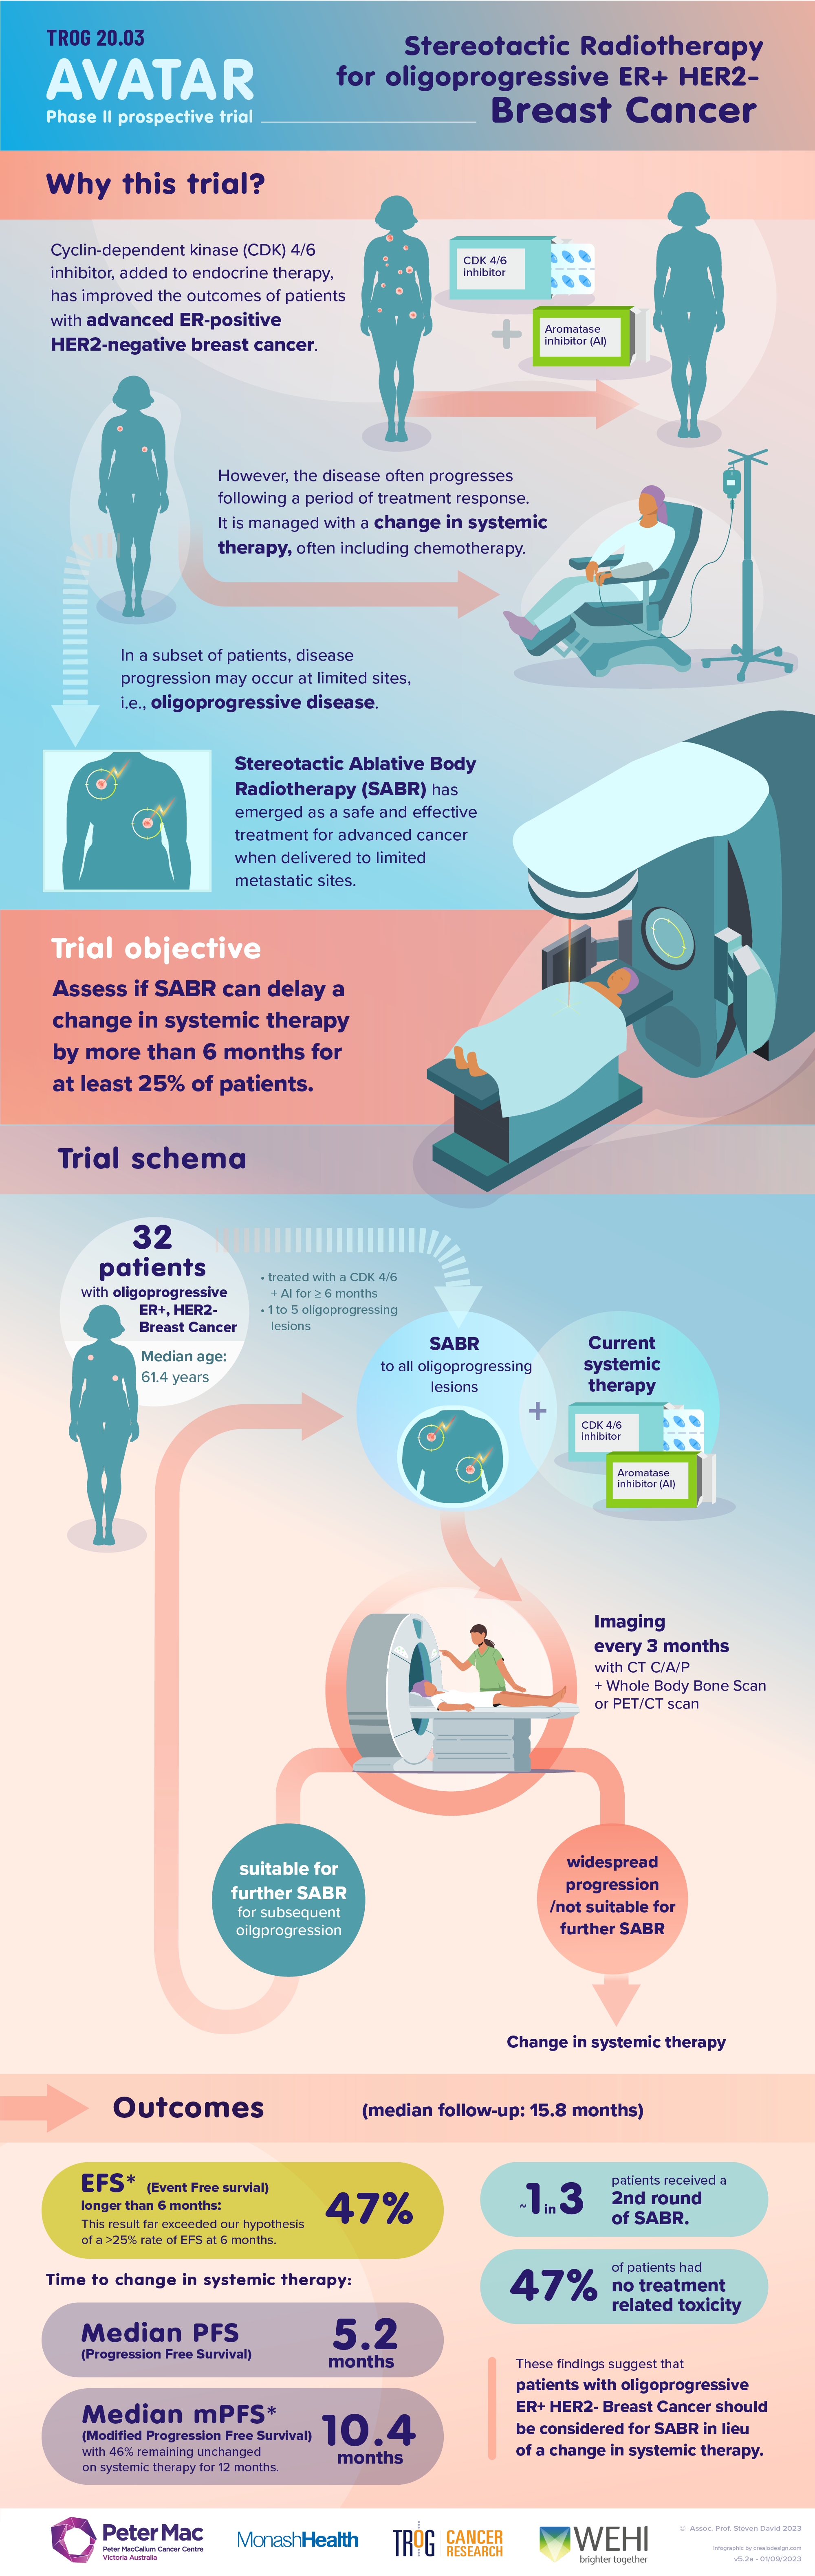 AVATAR clincal trial infographic design context schema and outcomes